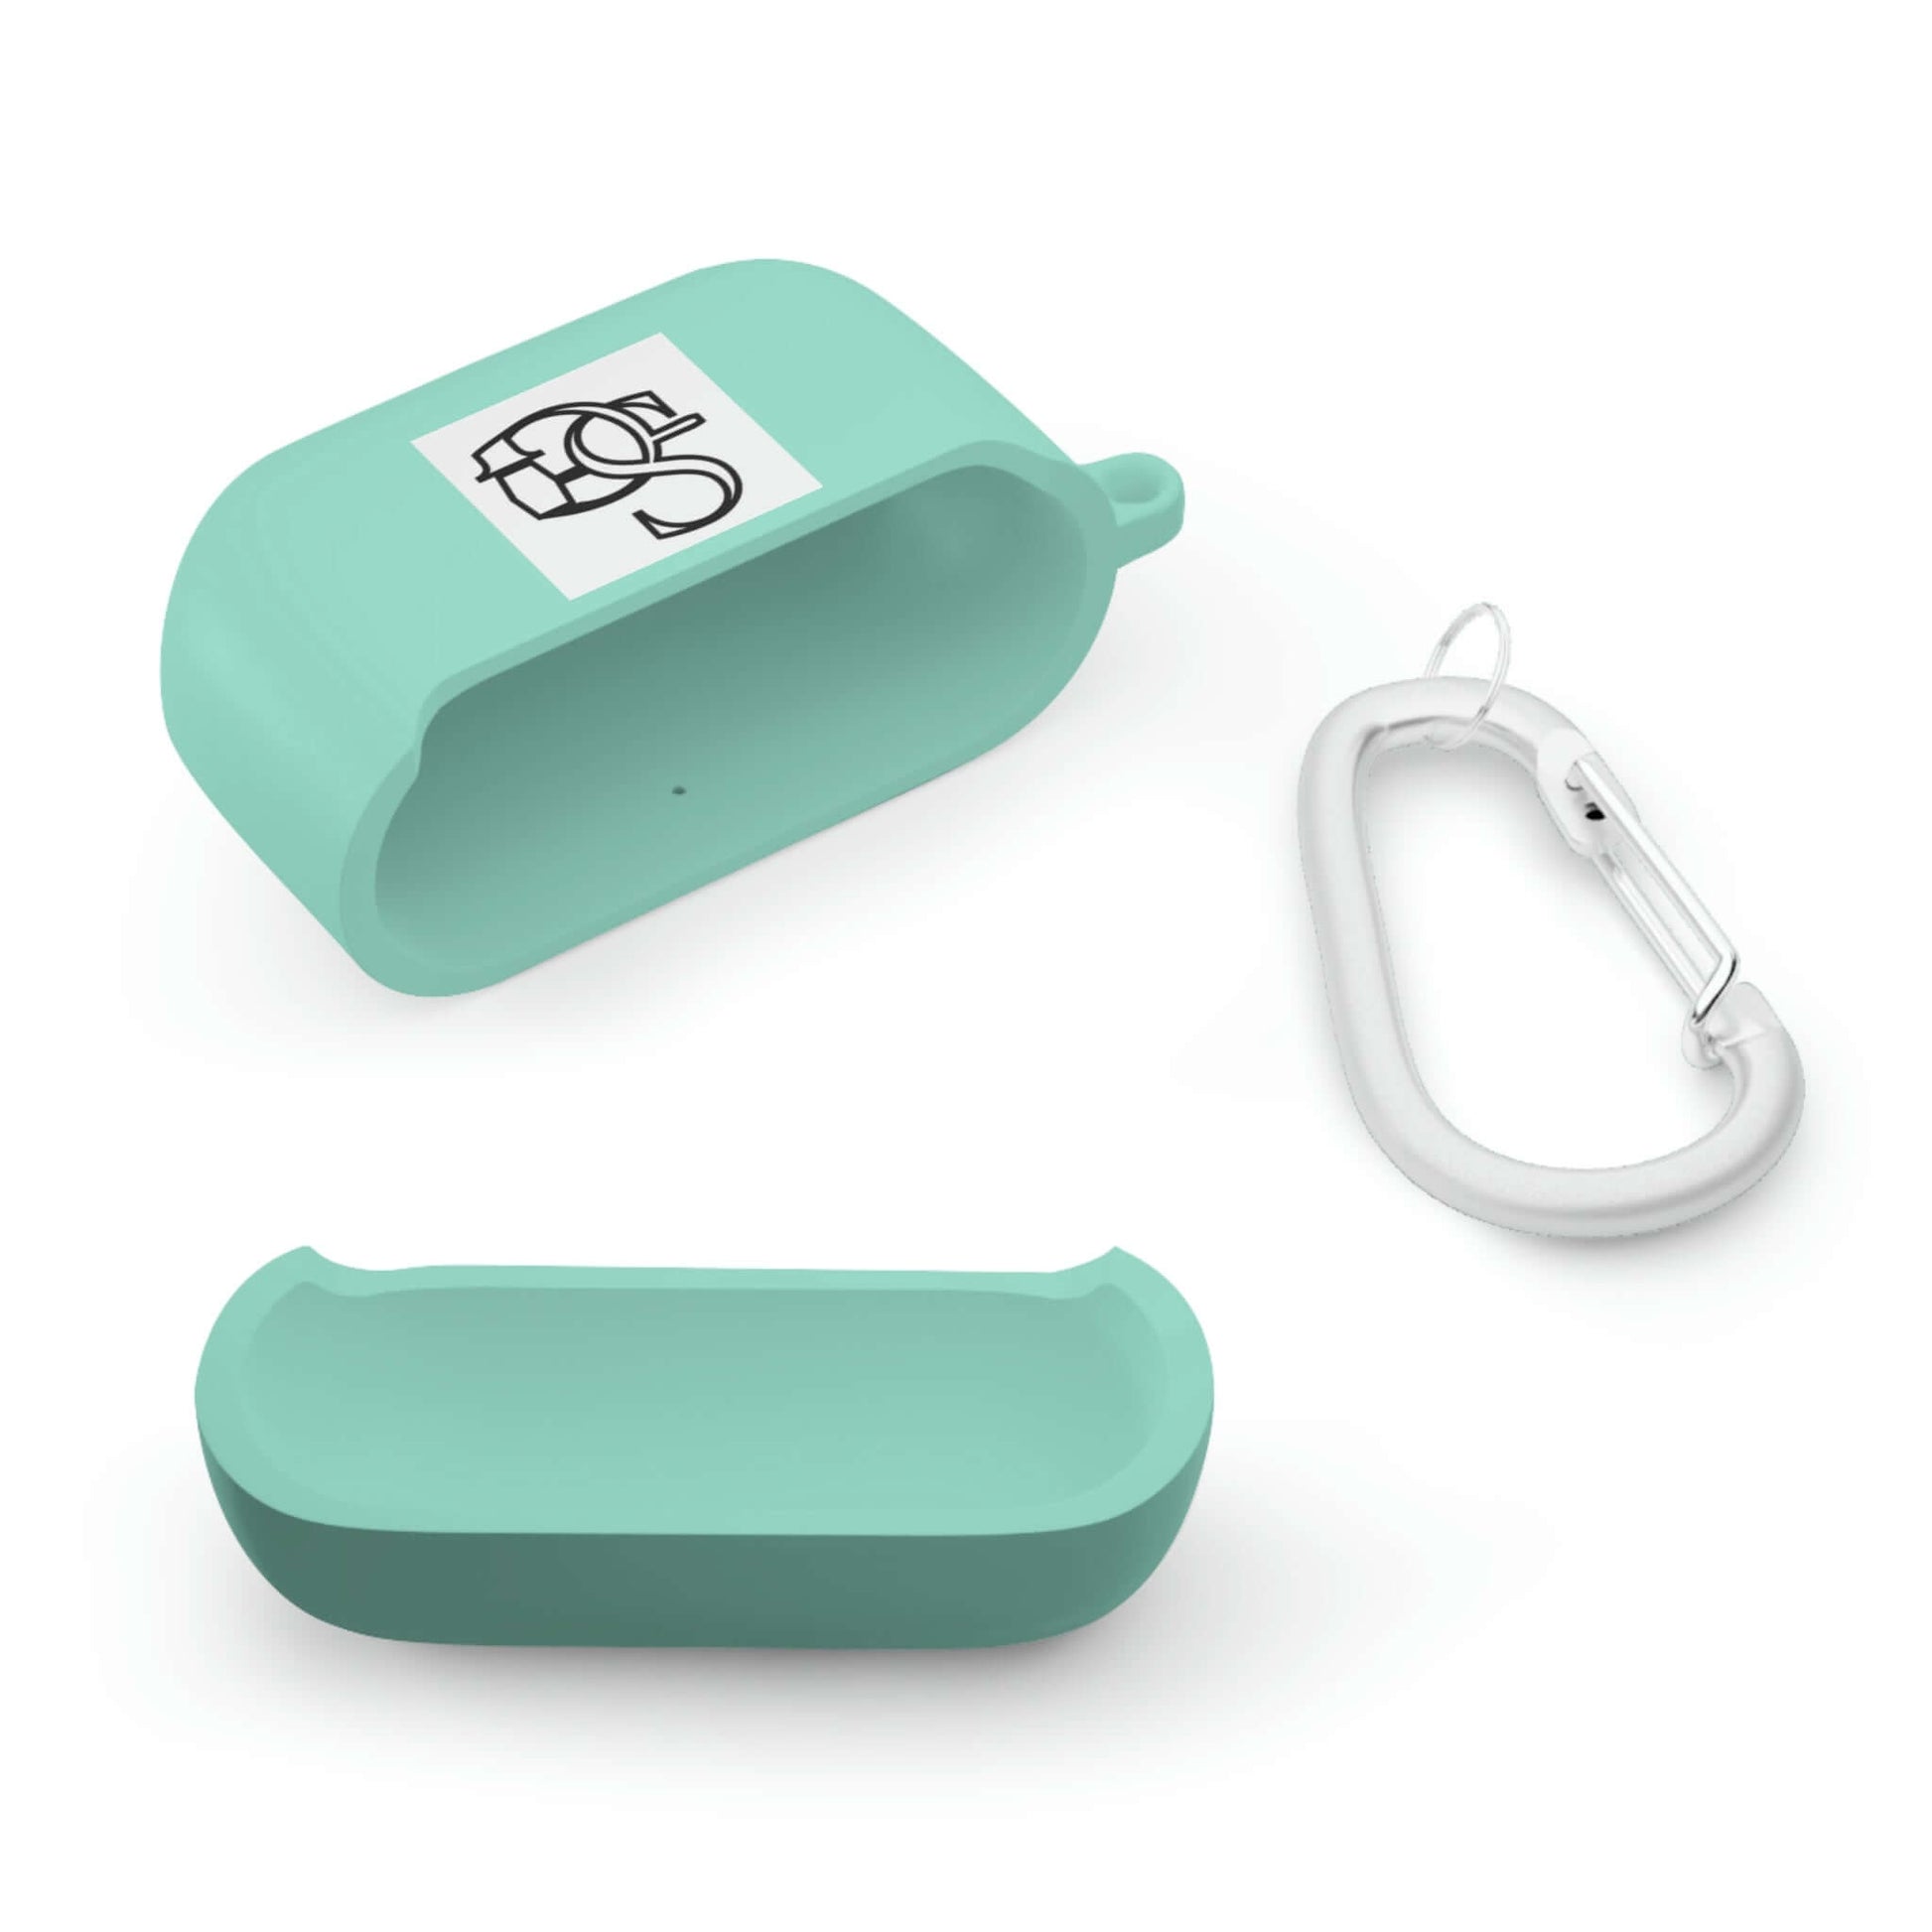 Air Pod Case with teal cover with Six-Gen Forge Logo